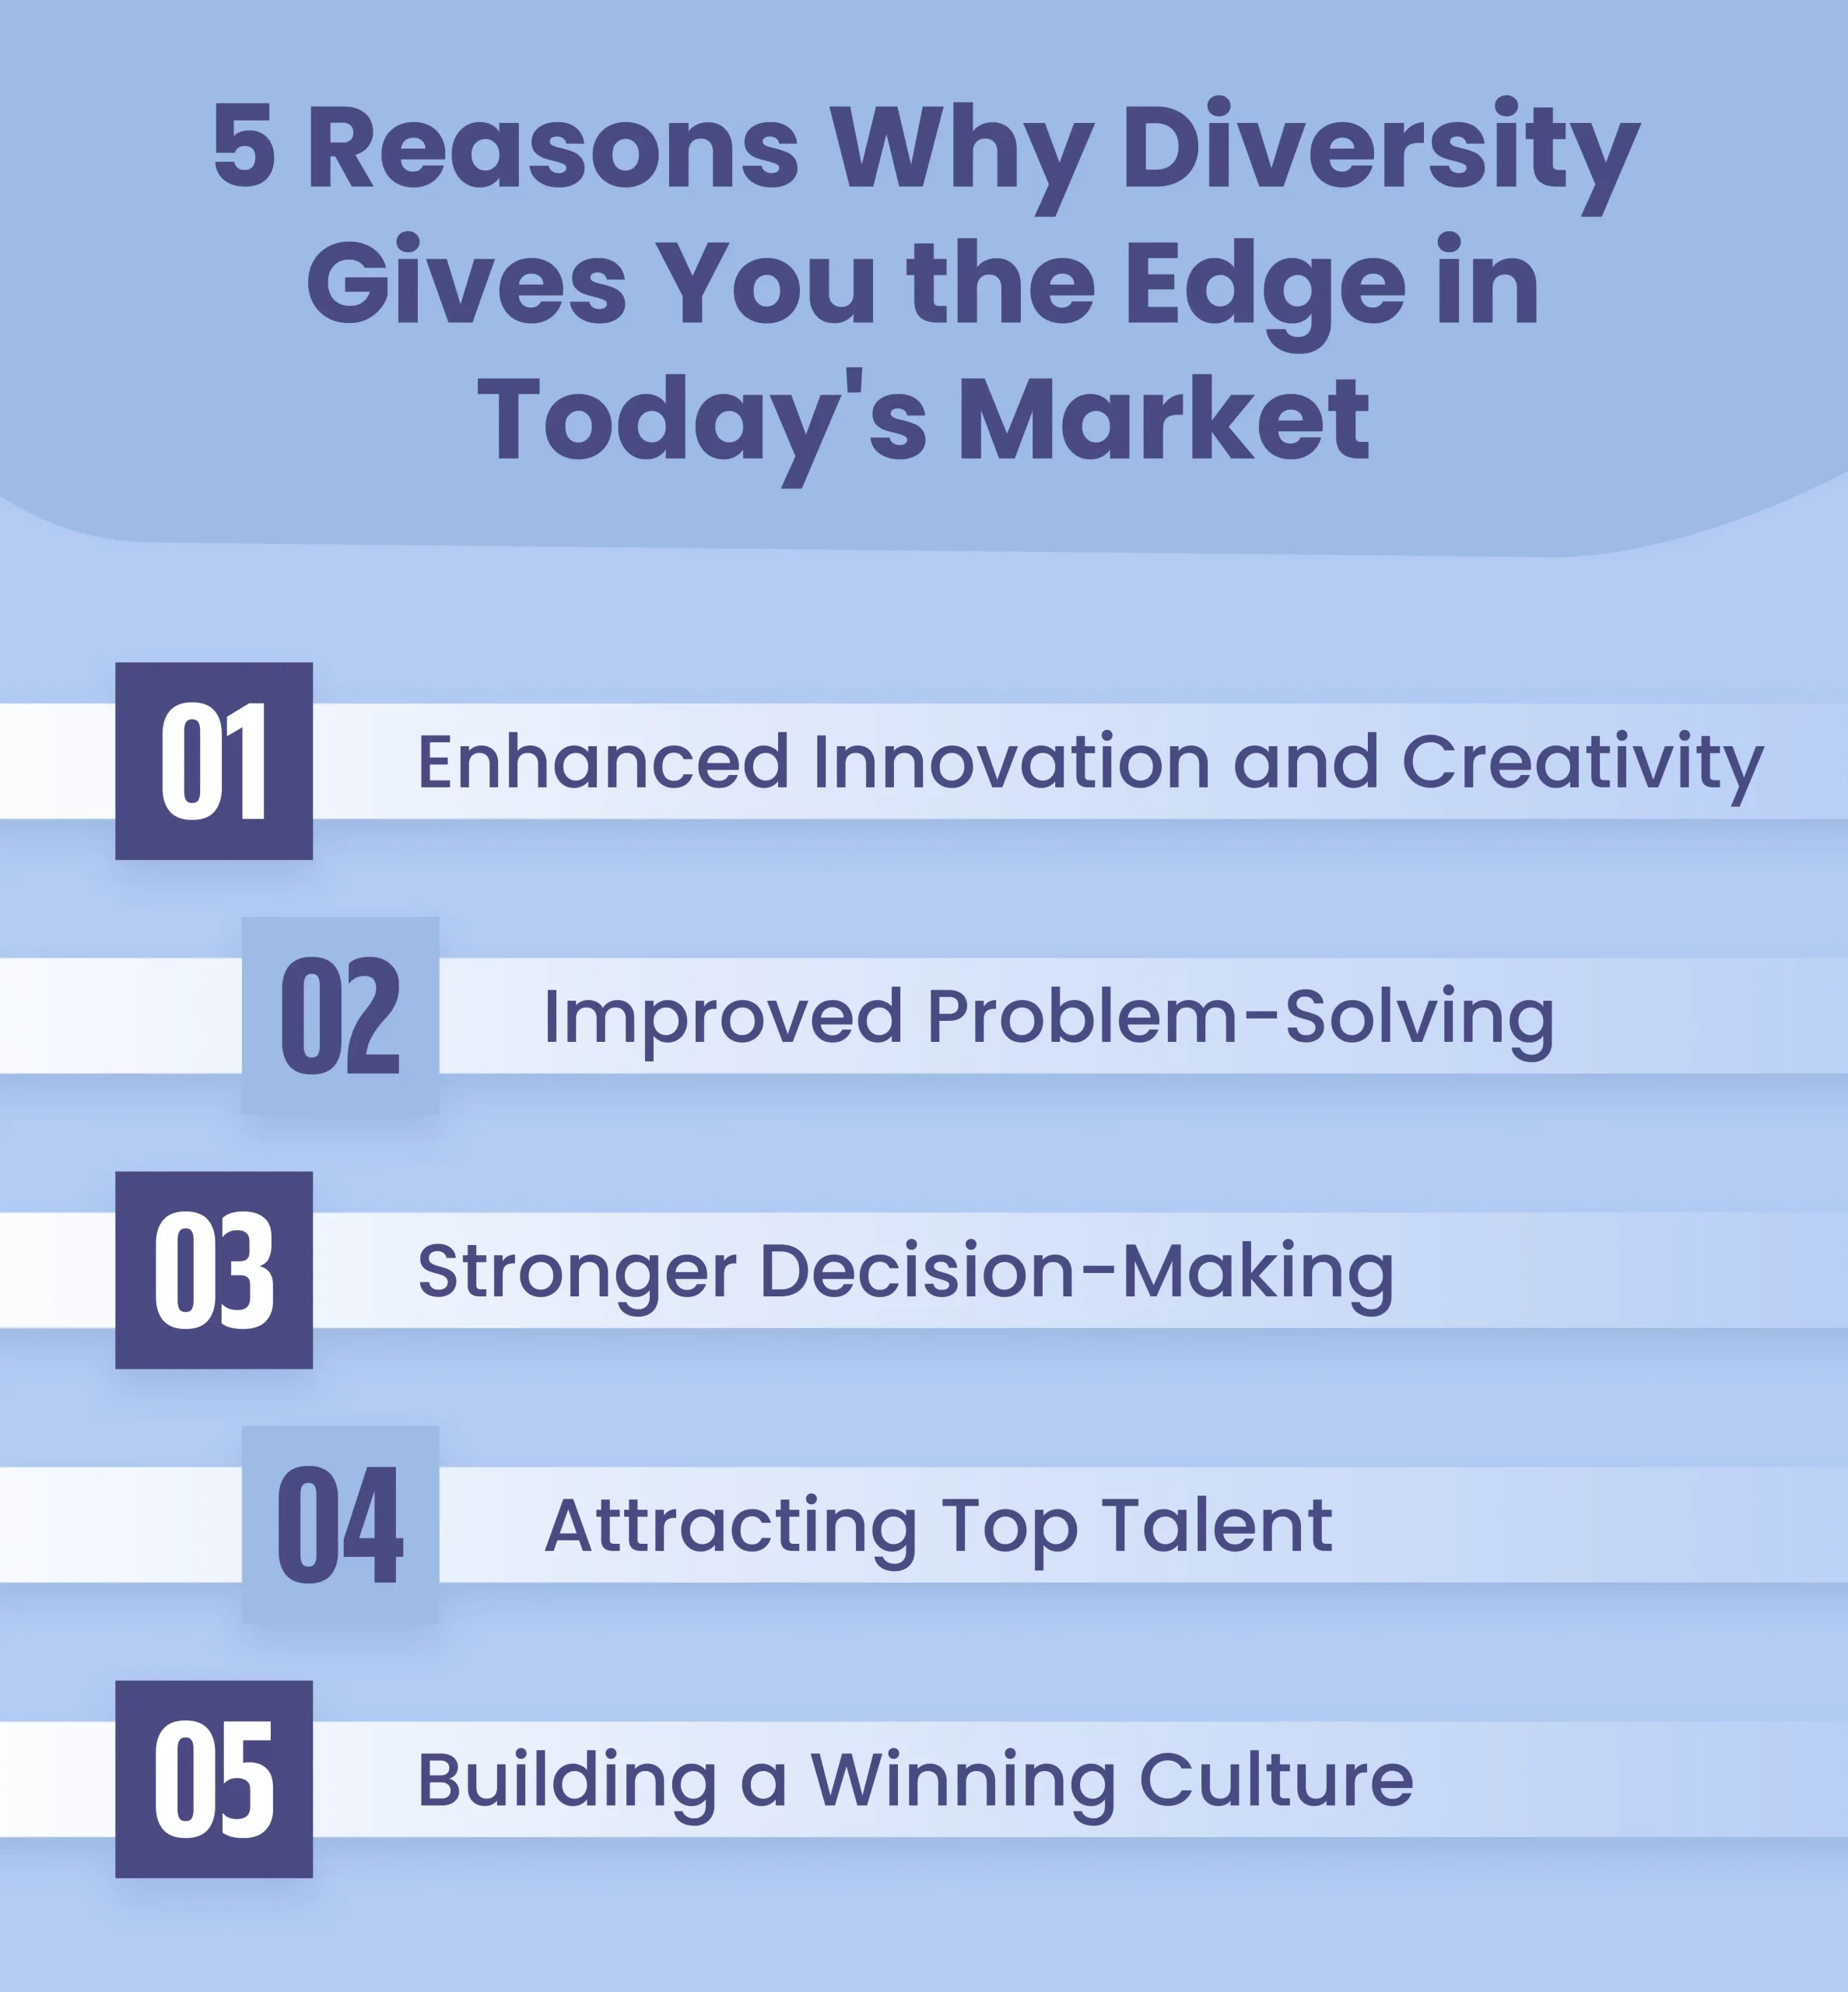 5 Reasons Why Diversity Gives You the Edge in Today's Market